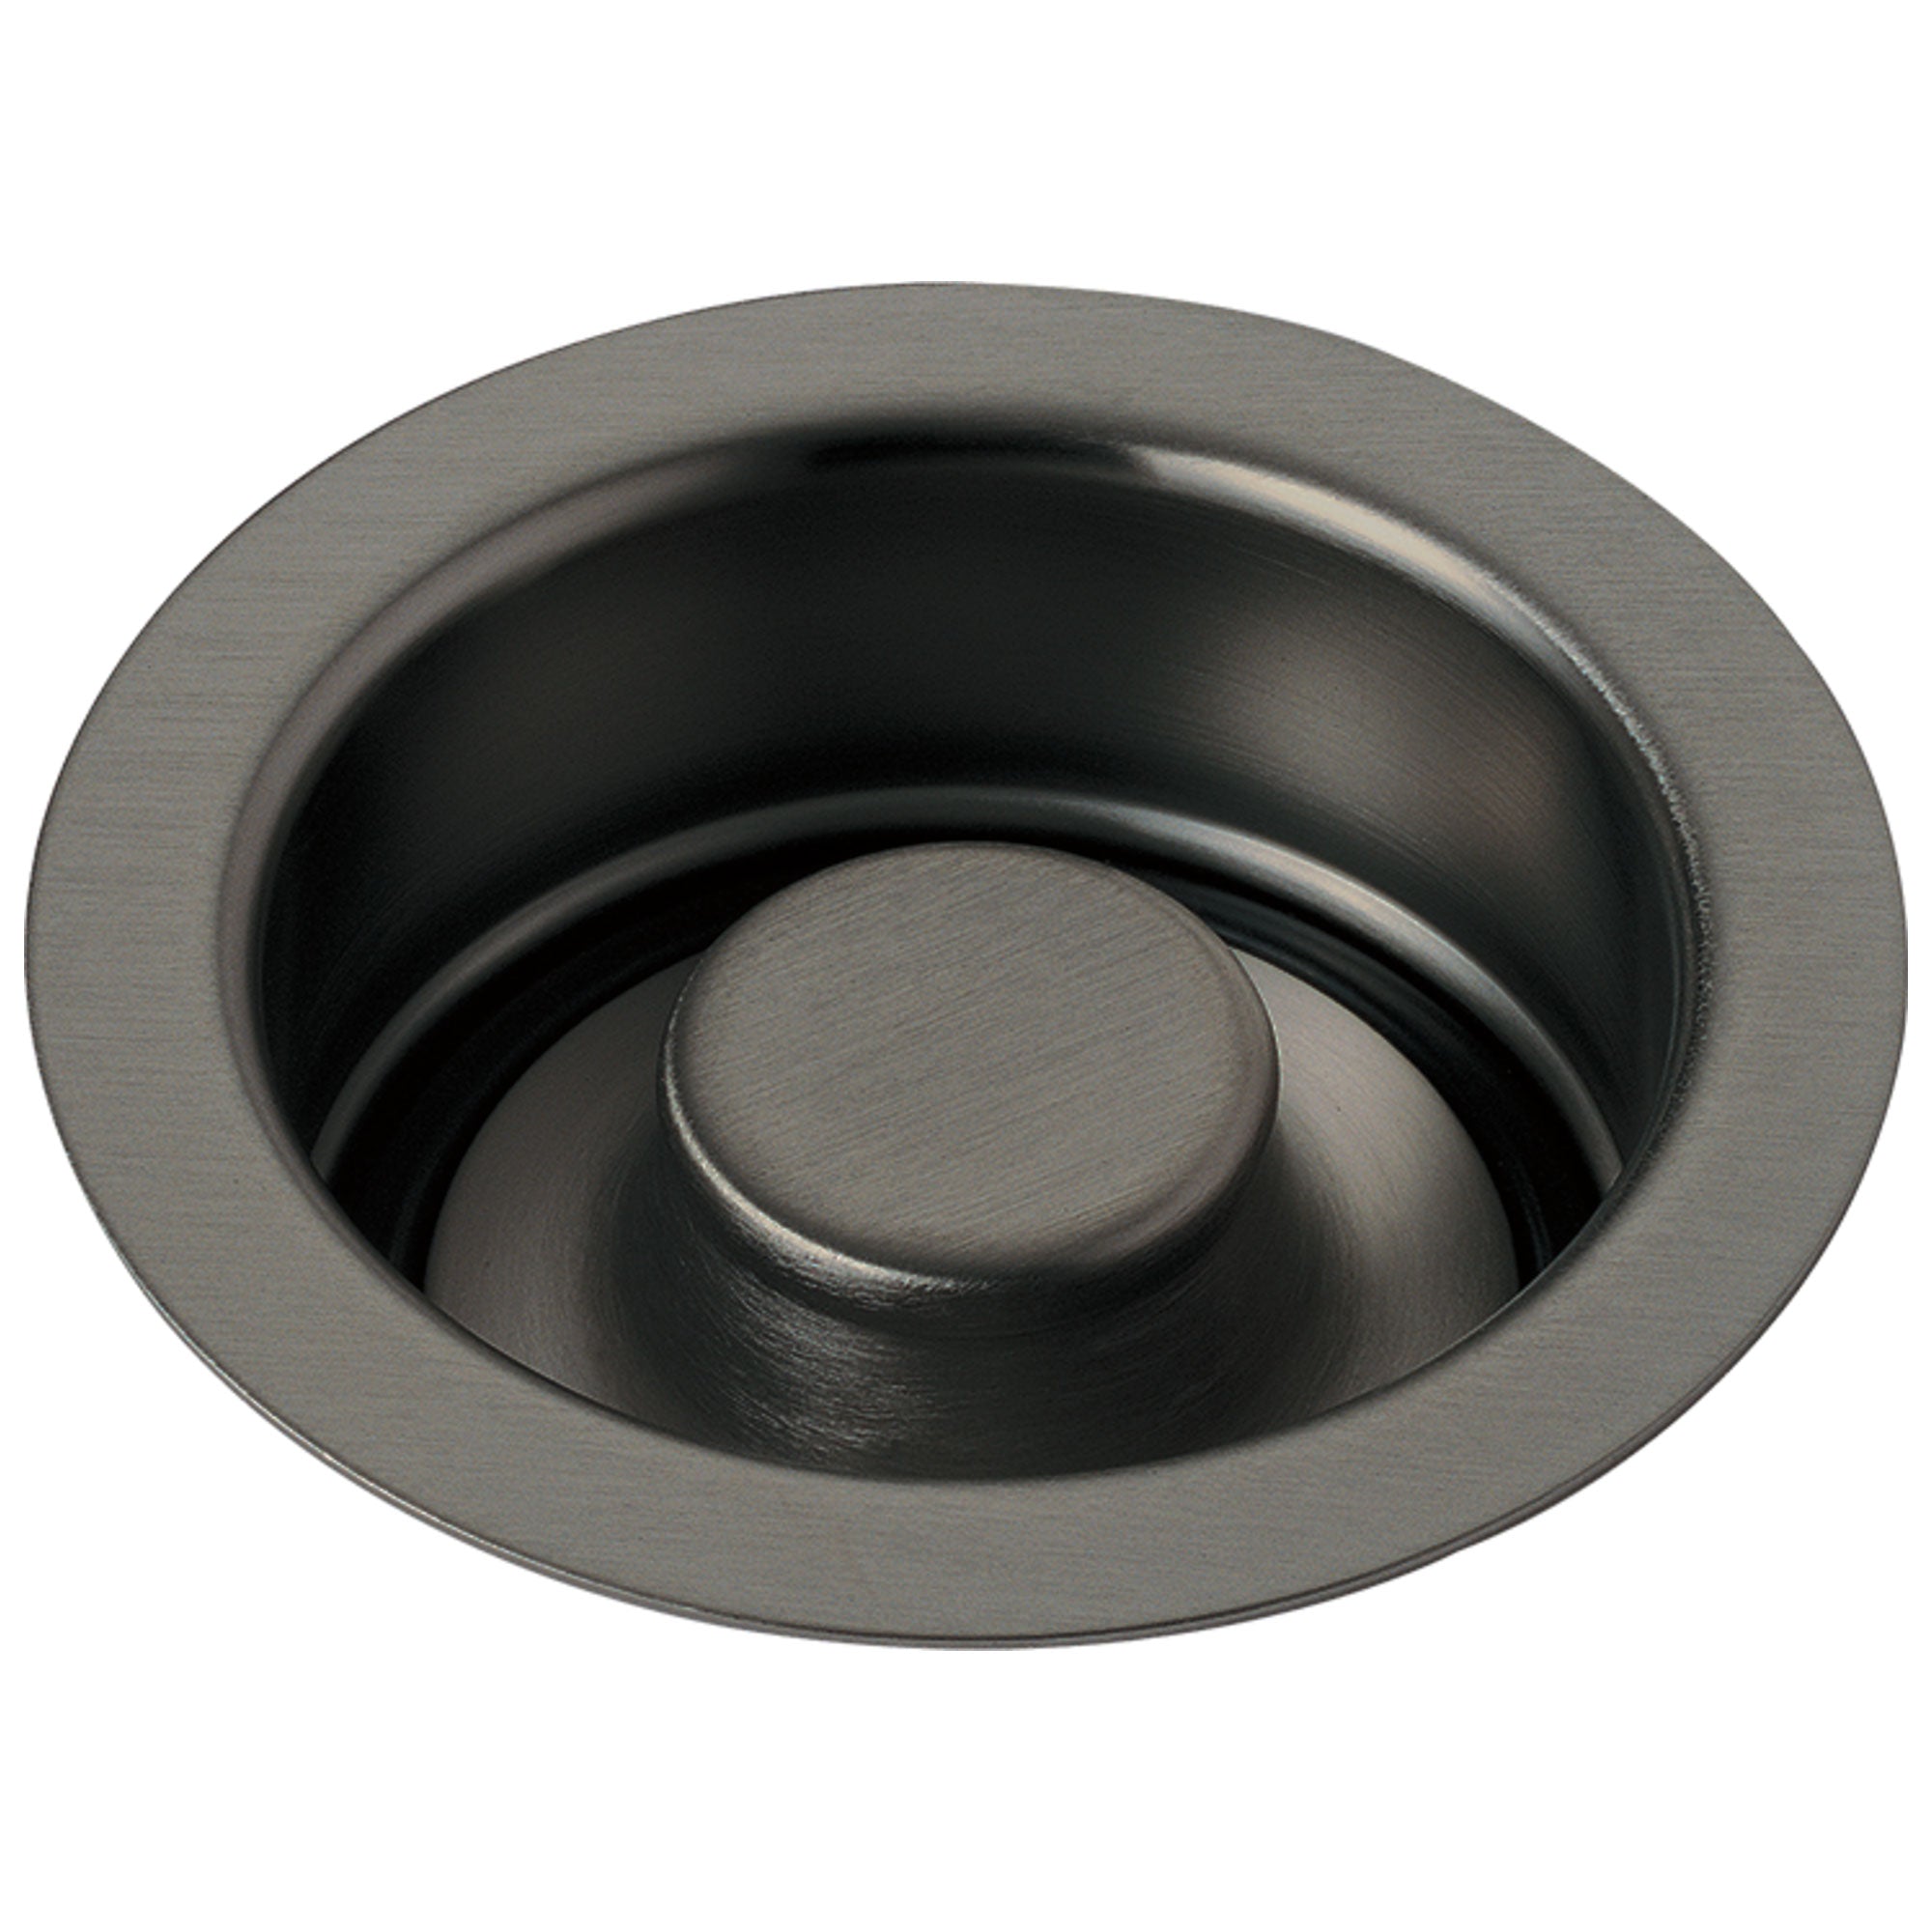 Delta Contemporary Black Stainless Steel Finish Kitchen Sink Disposal and Flange Stopper D72030KS